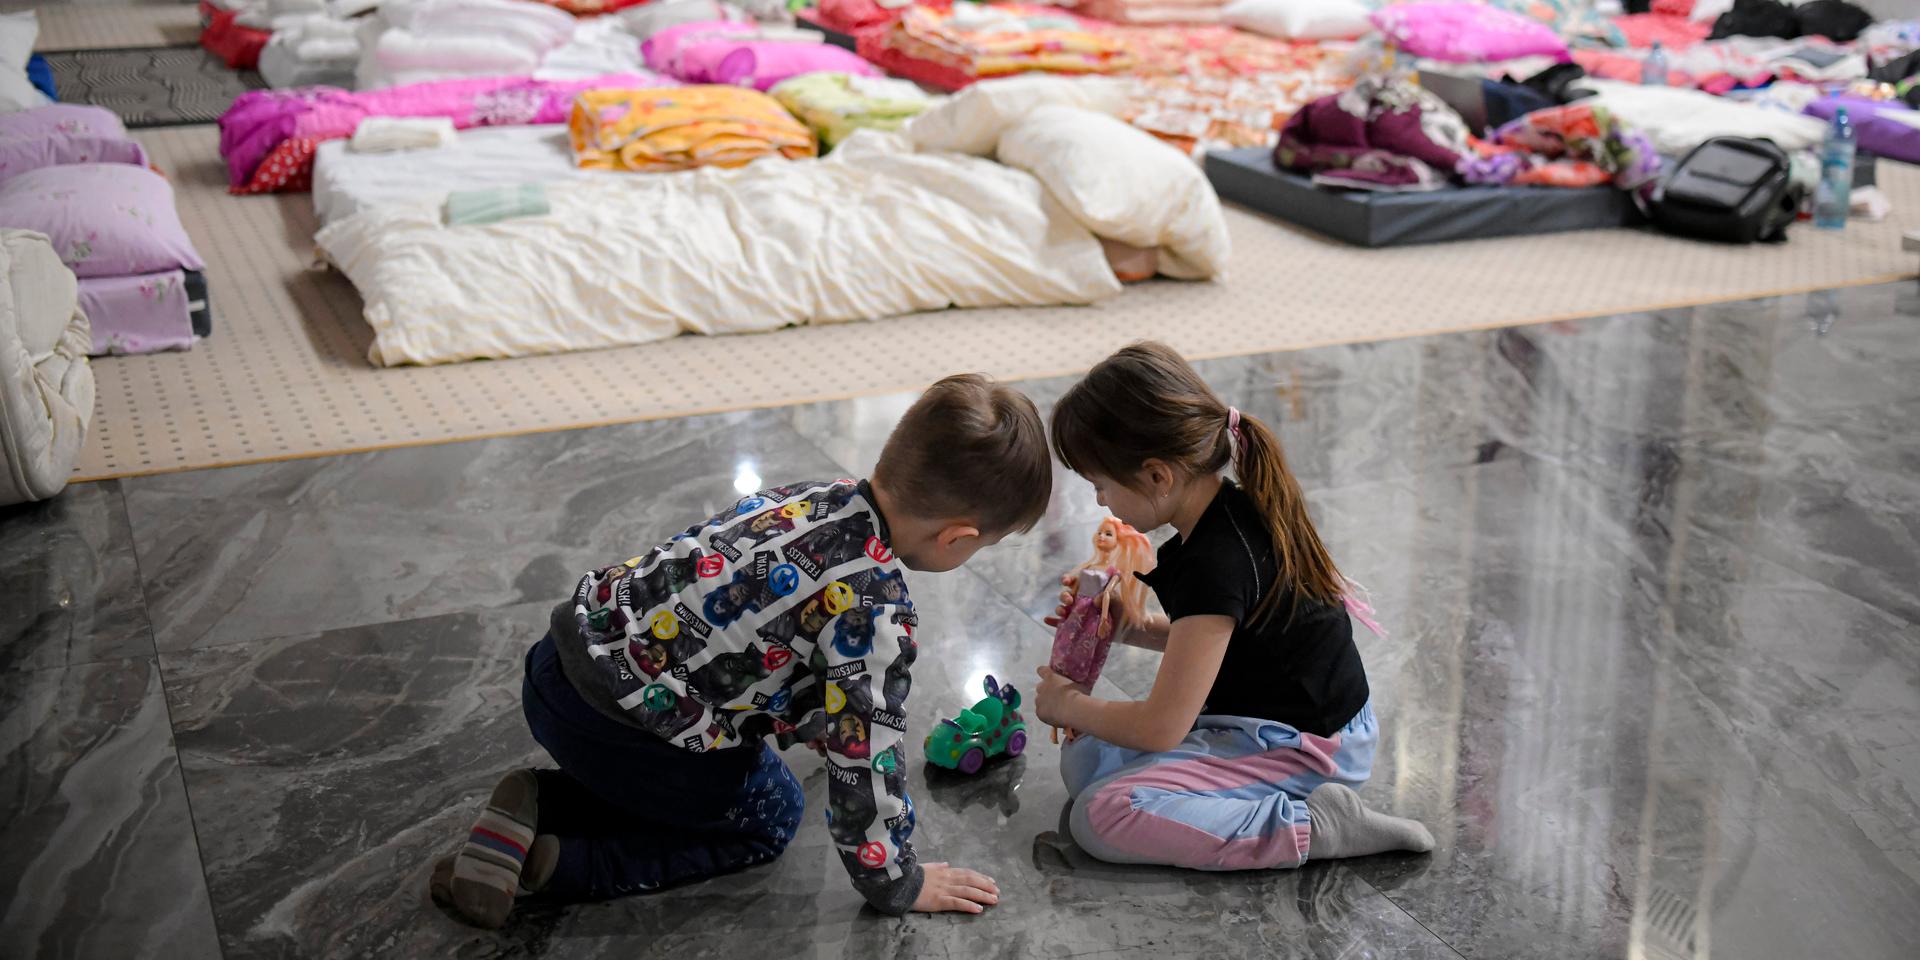 Children who fled the conflict from neighboring Ukraine play on the floor of an event hall in a hotel offering shelter in Siret, Romania, Saturday, Feb. 26, 2022. Romania, which shares around 600 kilometres (372 miles) of borders with Ukraine to the north, is seeing an influx of refugees from the country as many flee Russia's attacks. (AP Photo/Andreea Alexandru)  XAA821